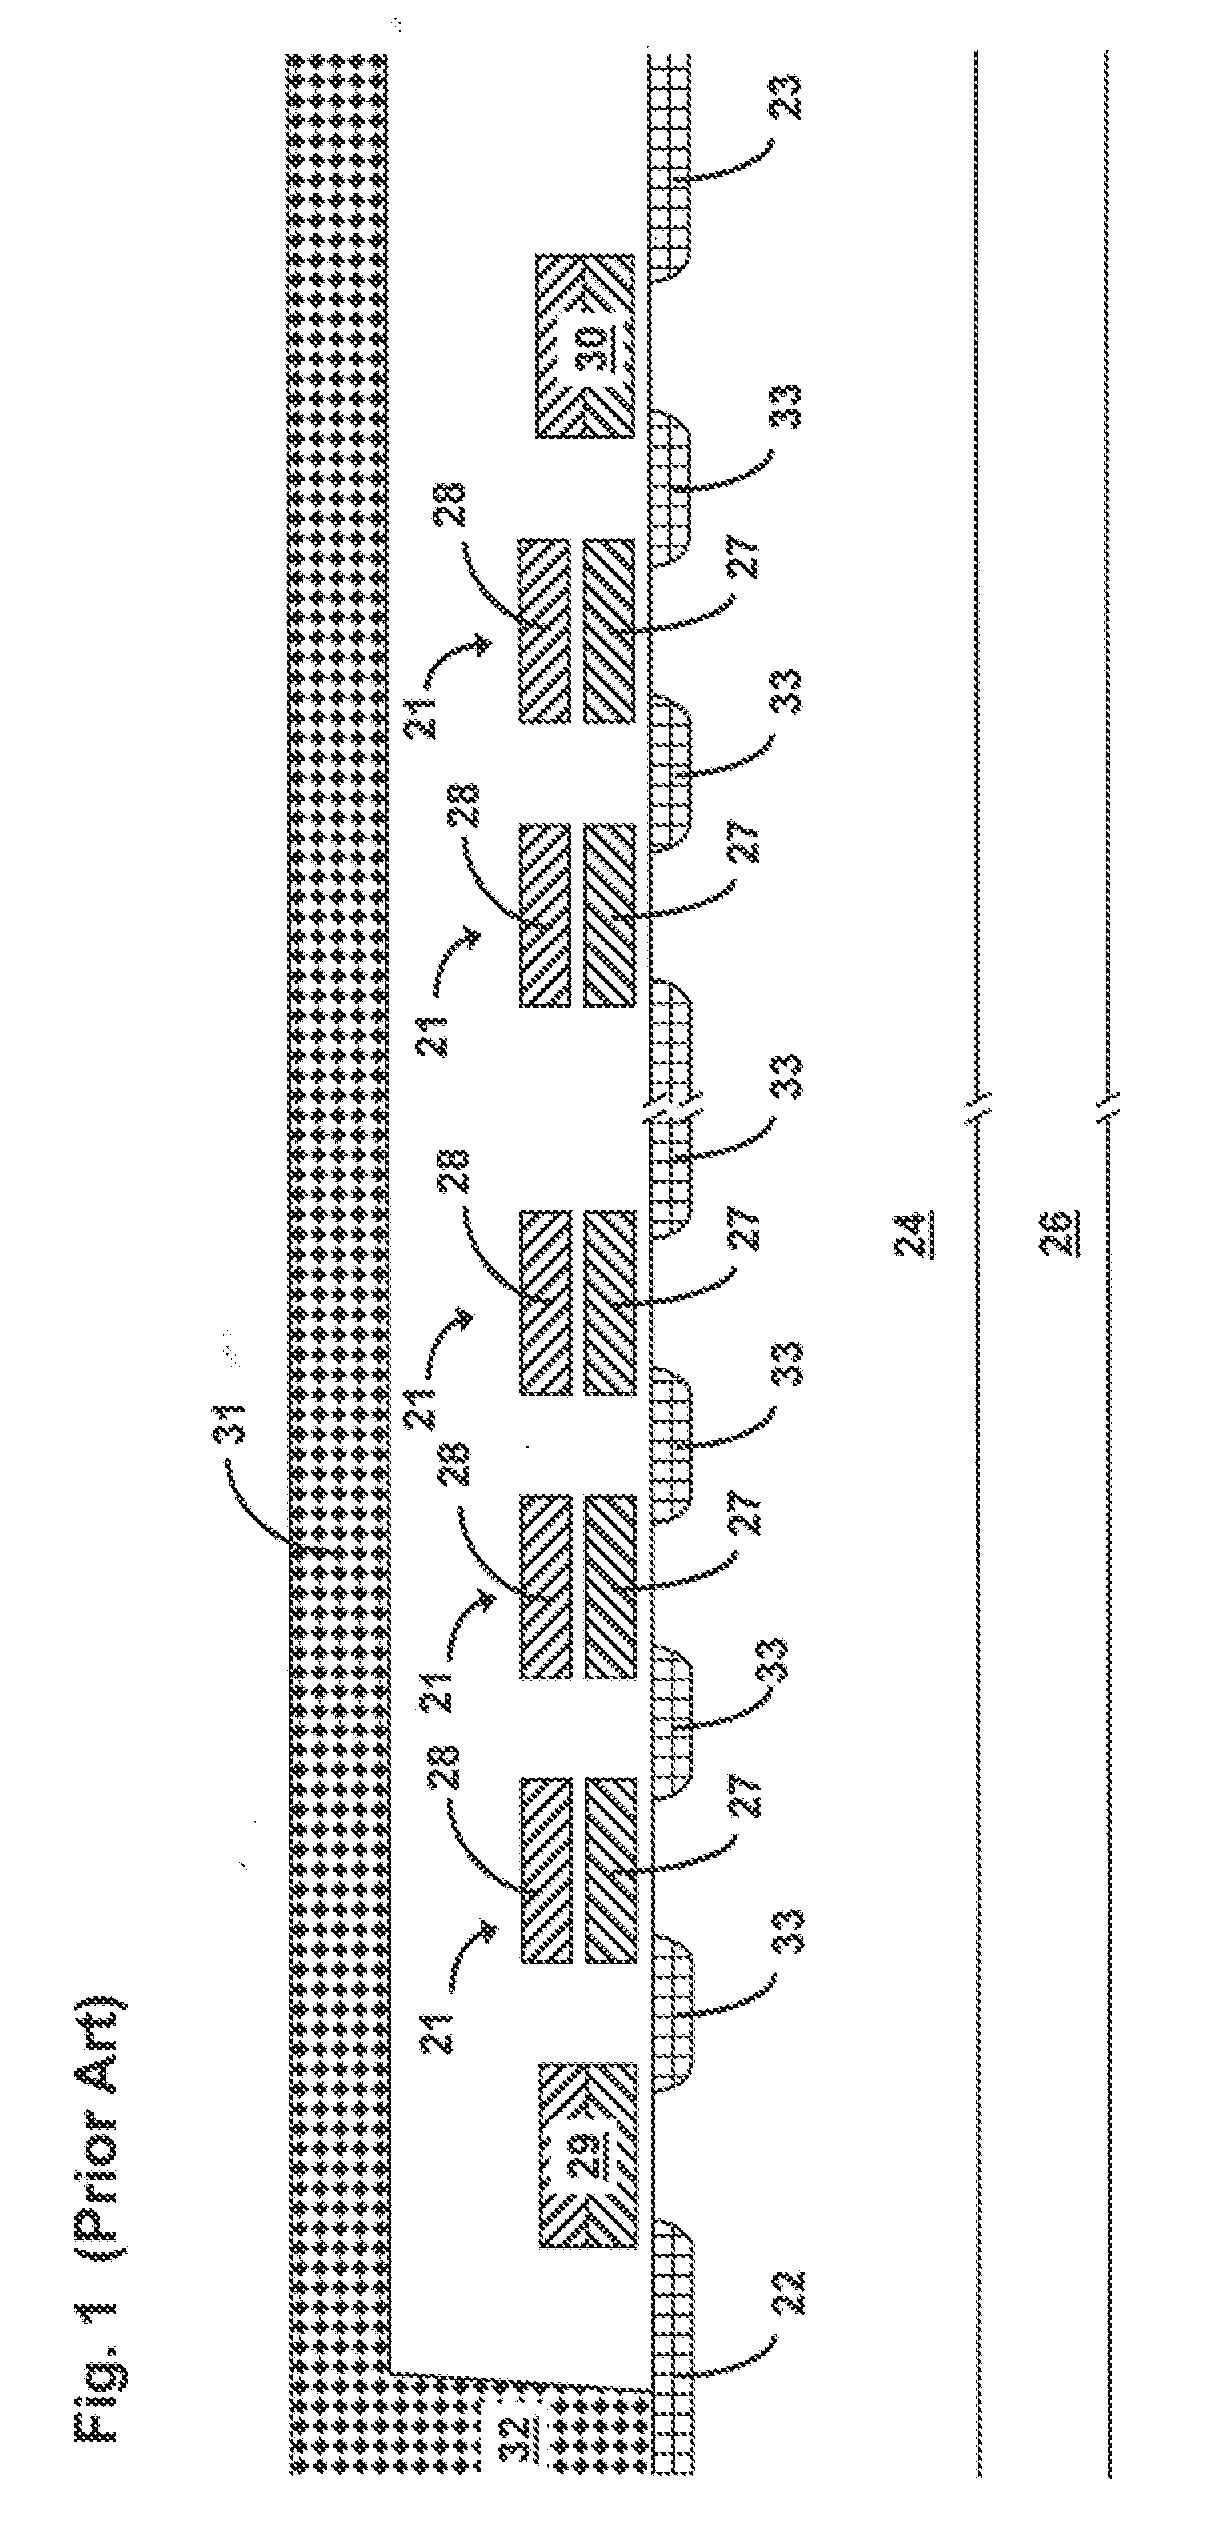 NAND Flash Memory with Densely Packed Memory Gates and Fabrication Process